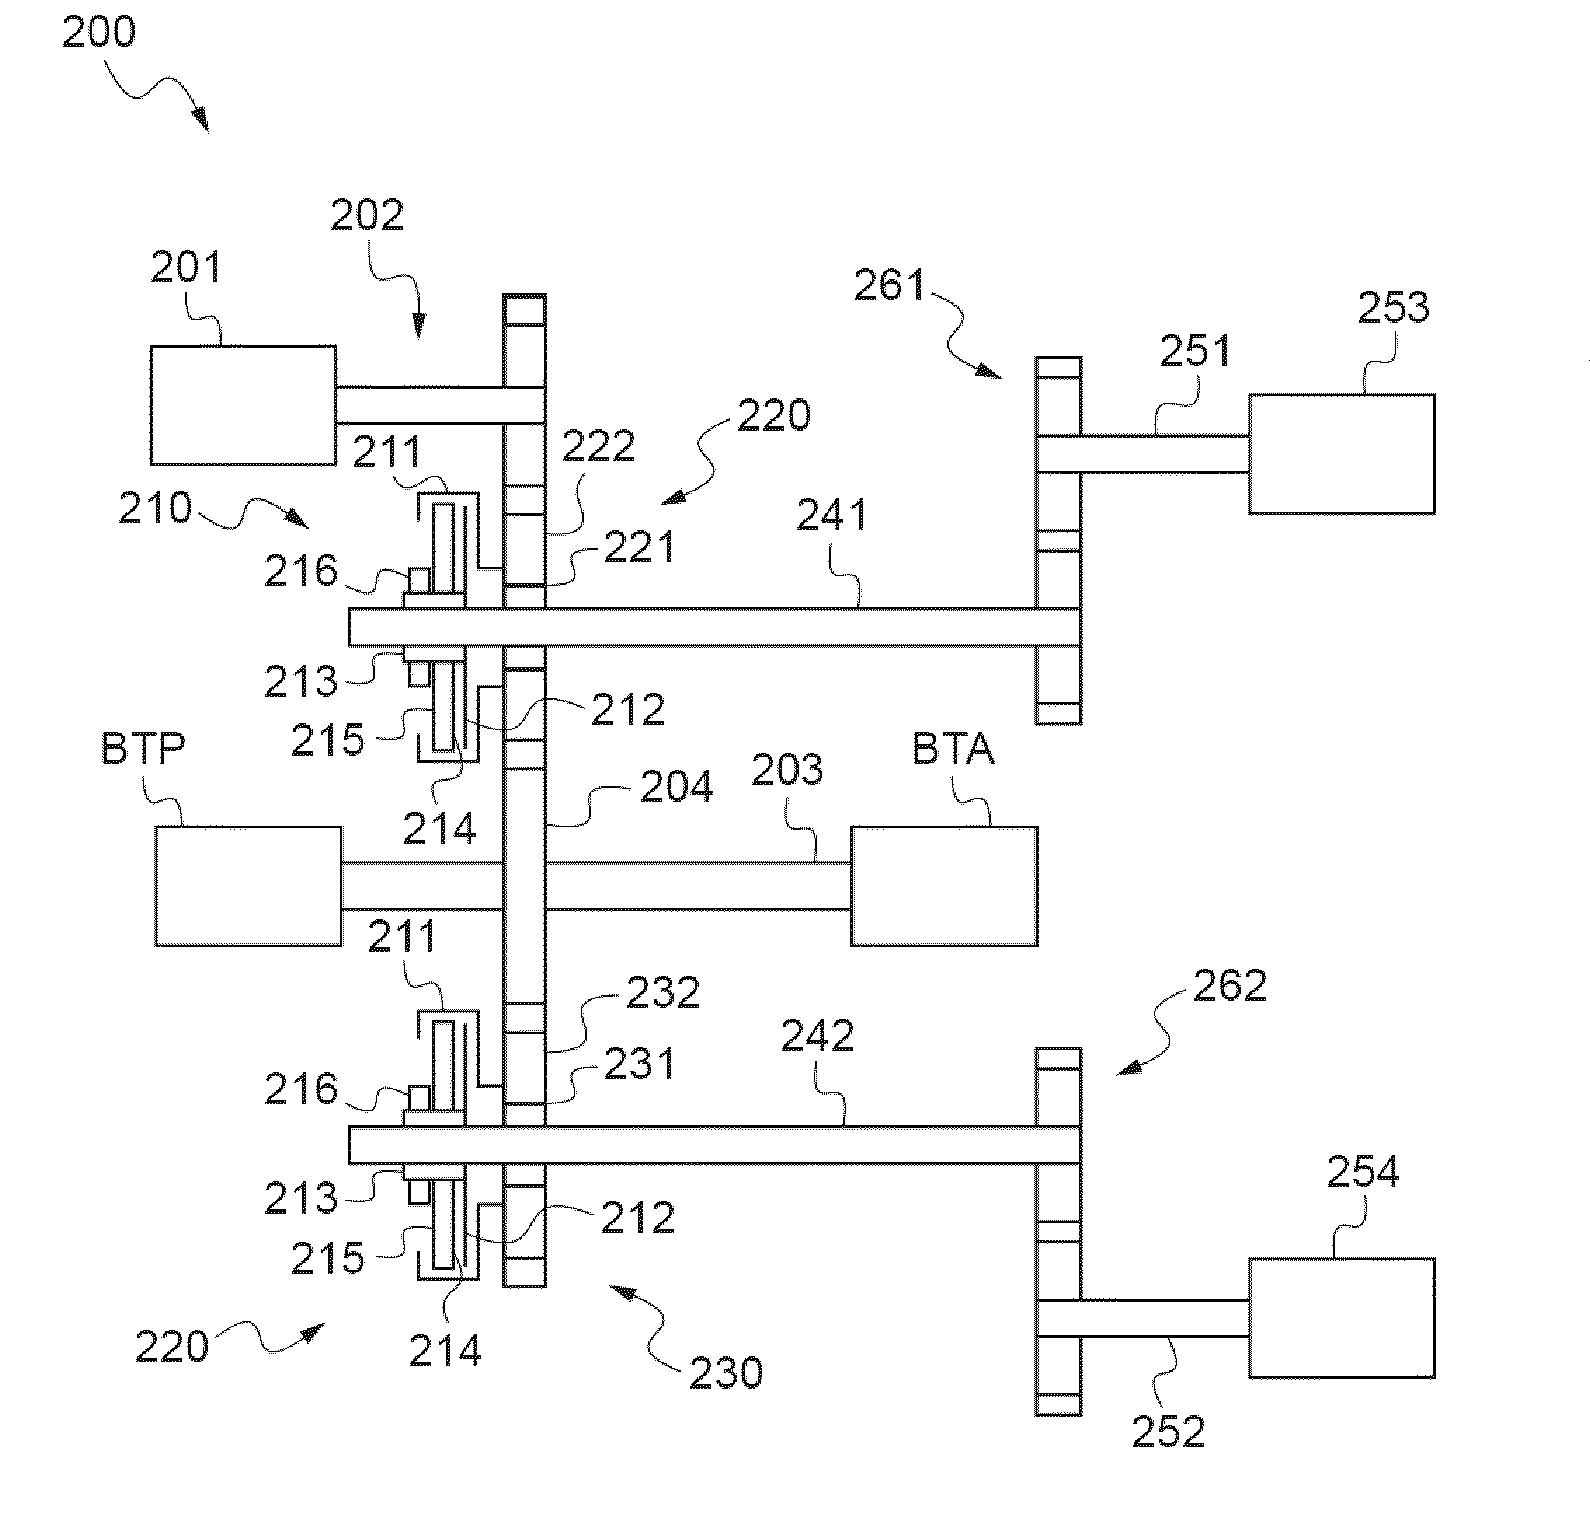 Hybrid engine installation and a method of controlling such an engine installation